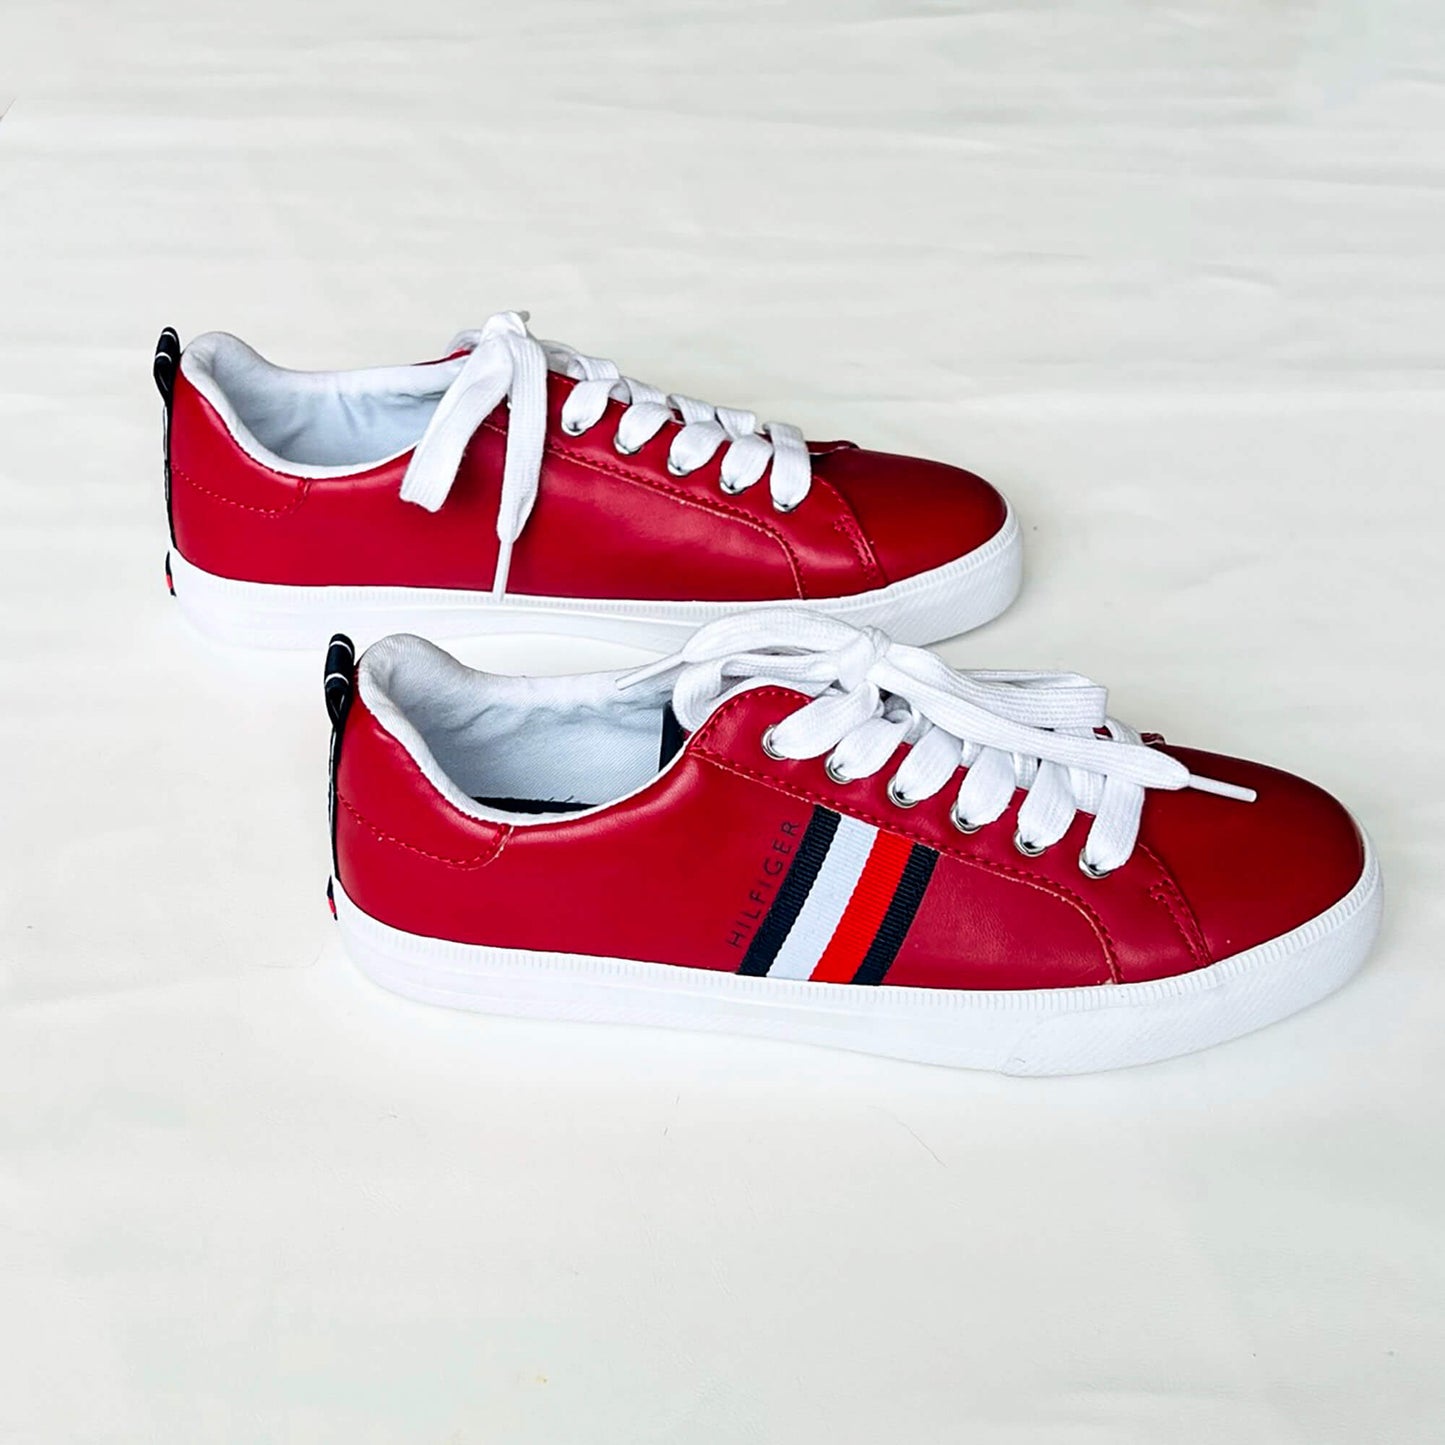 Womens-Tommy-Hilfiger-Red-Faux-Leather-Sneakers-Side-view.-7.5.-Shop-eBargainsAndDeals.com